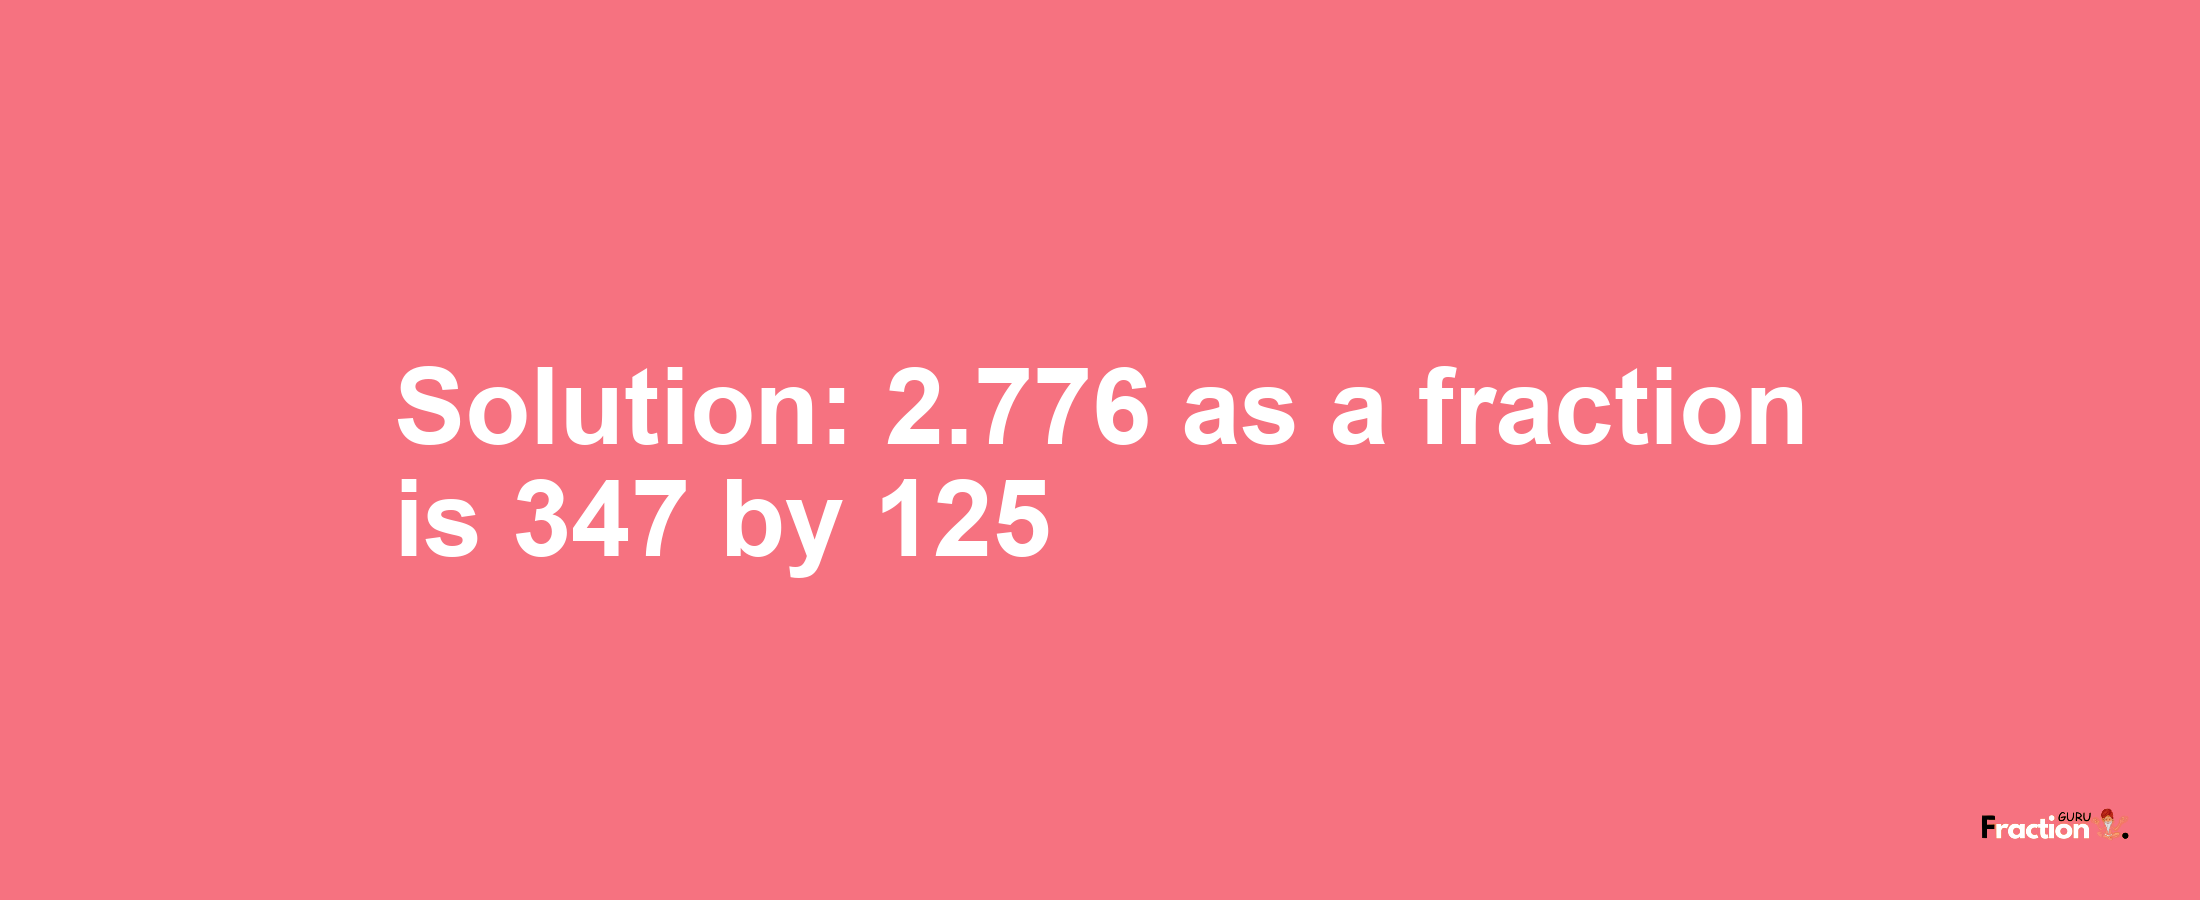 Solution:2.776 as a fraction is 347/125